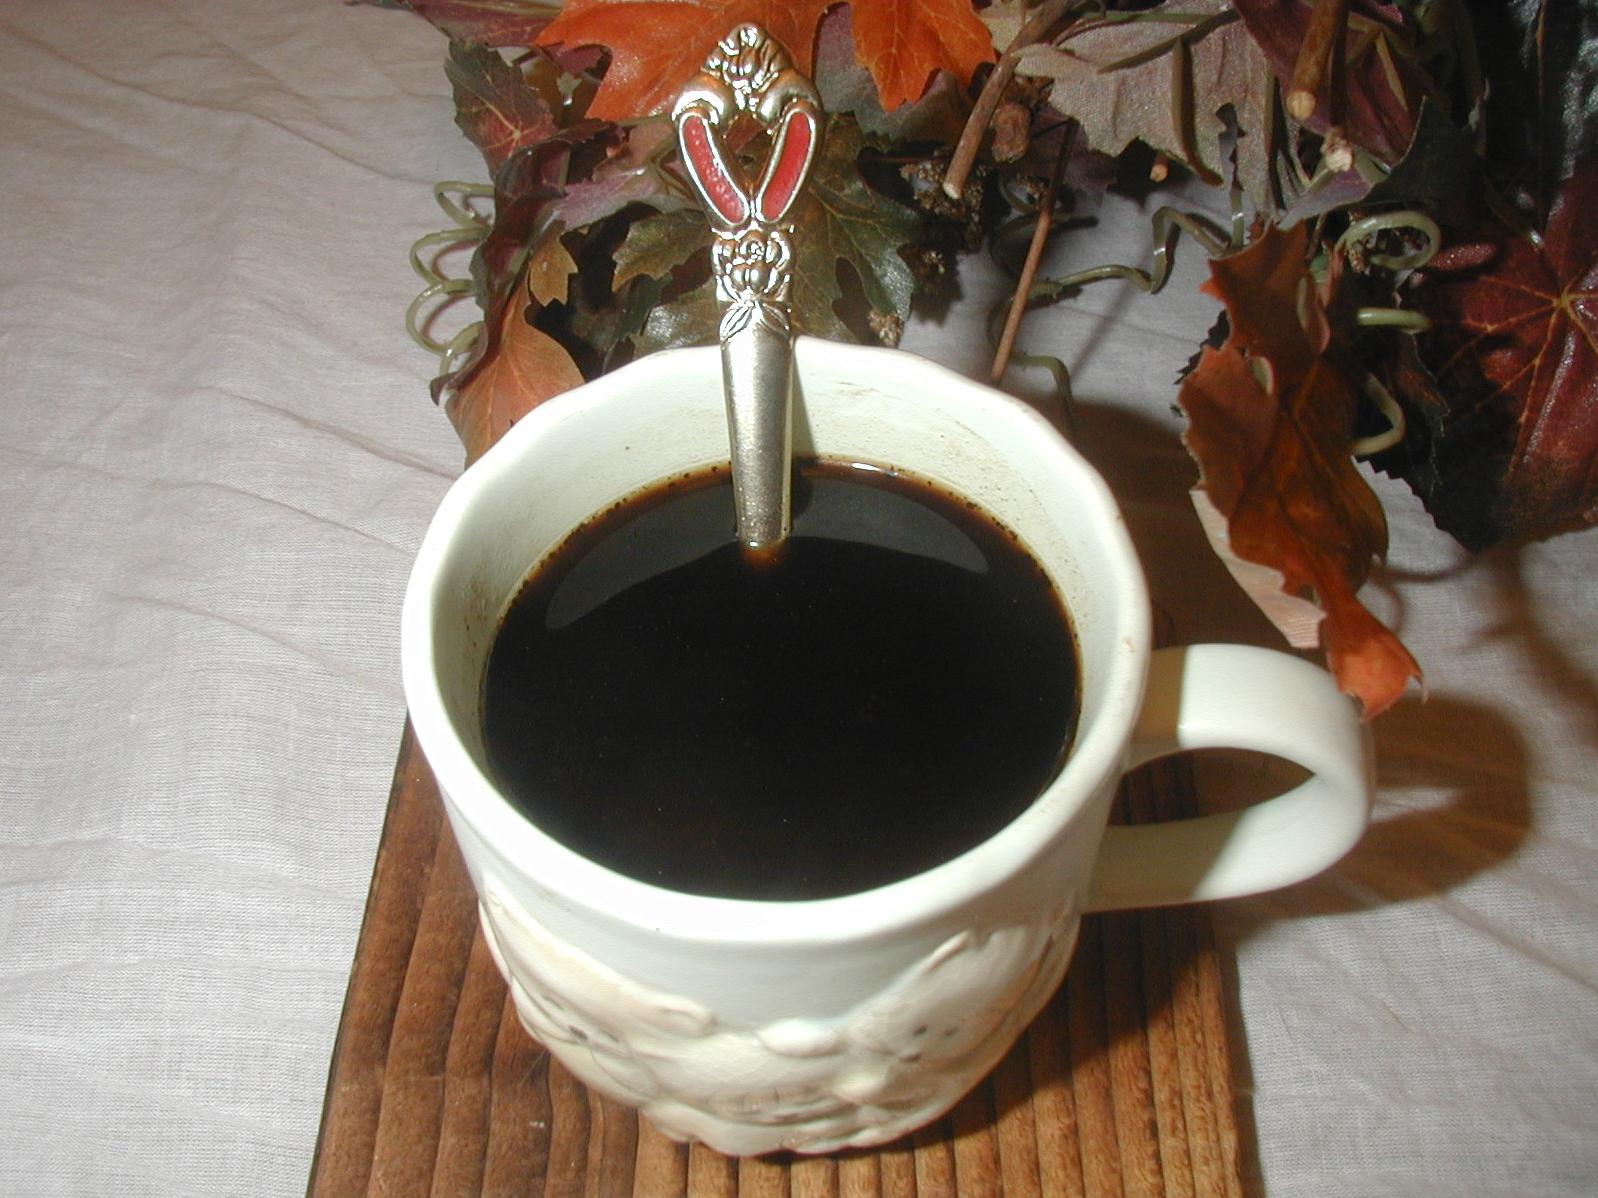  Experience a different side of coffee as you sip on this velvety and flavorful drink